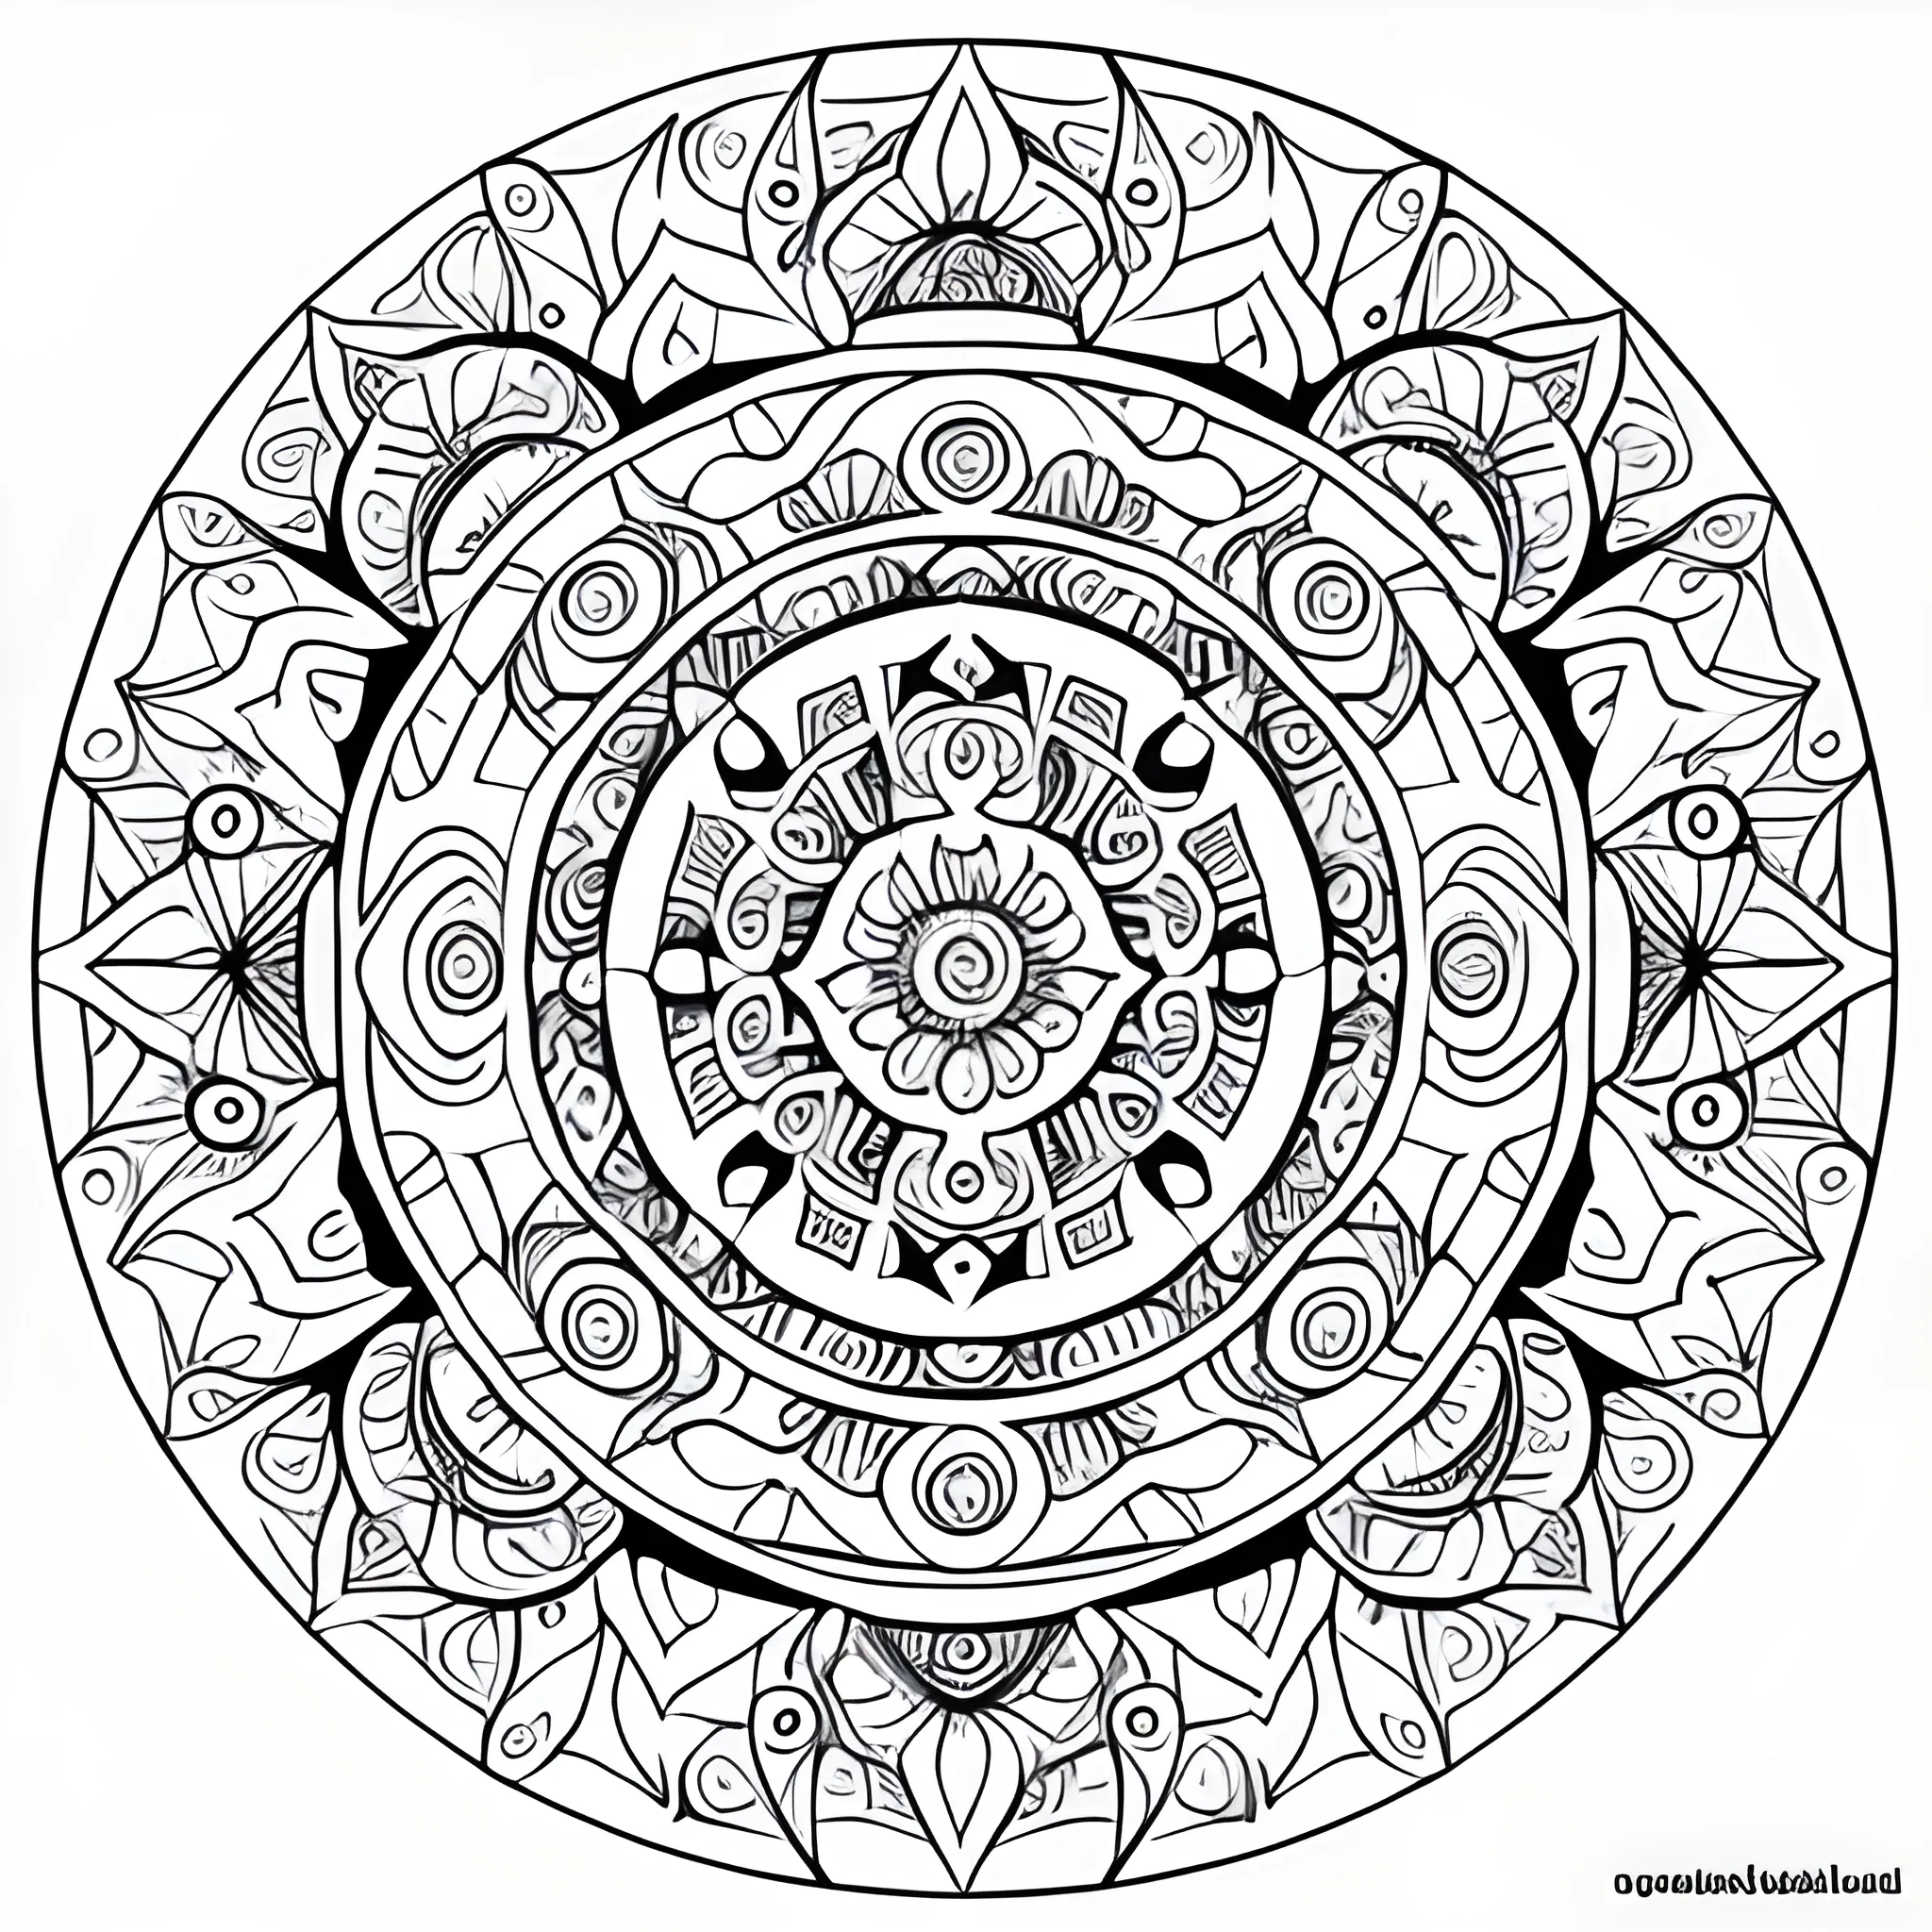 coloring book page detailed mandala dragon stencil bold lines, floral circle, inspired in the indian culture